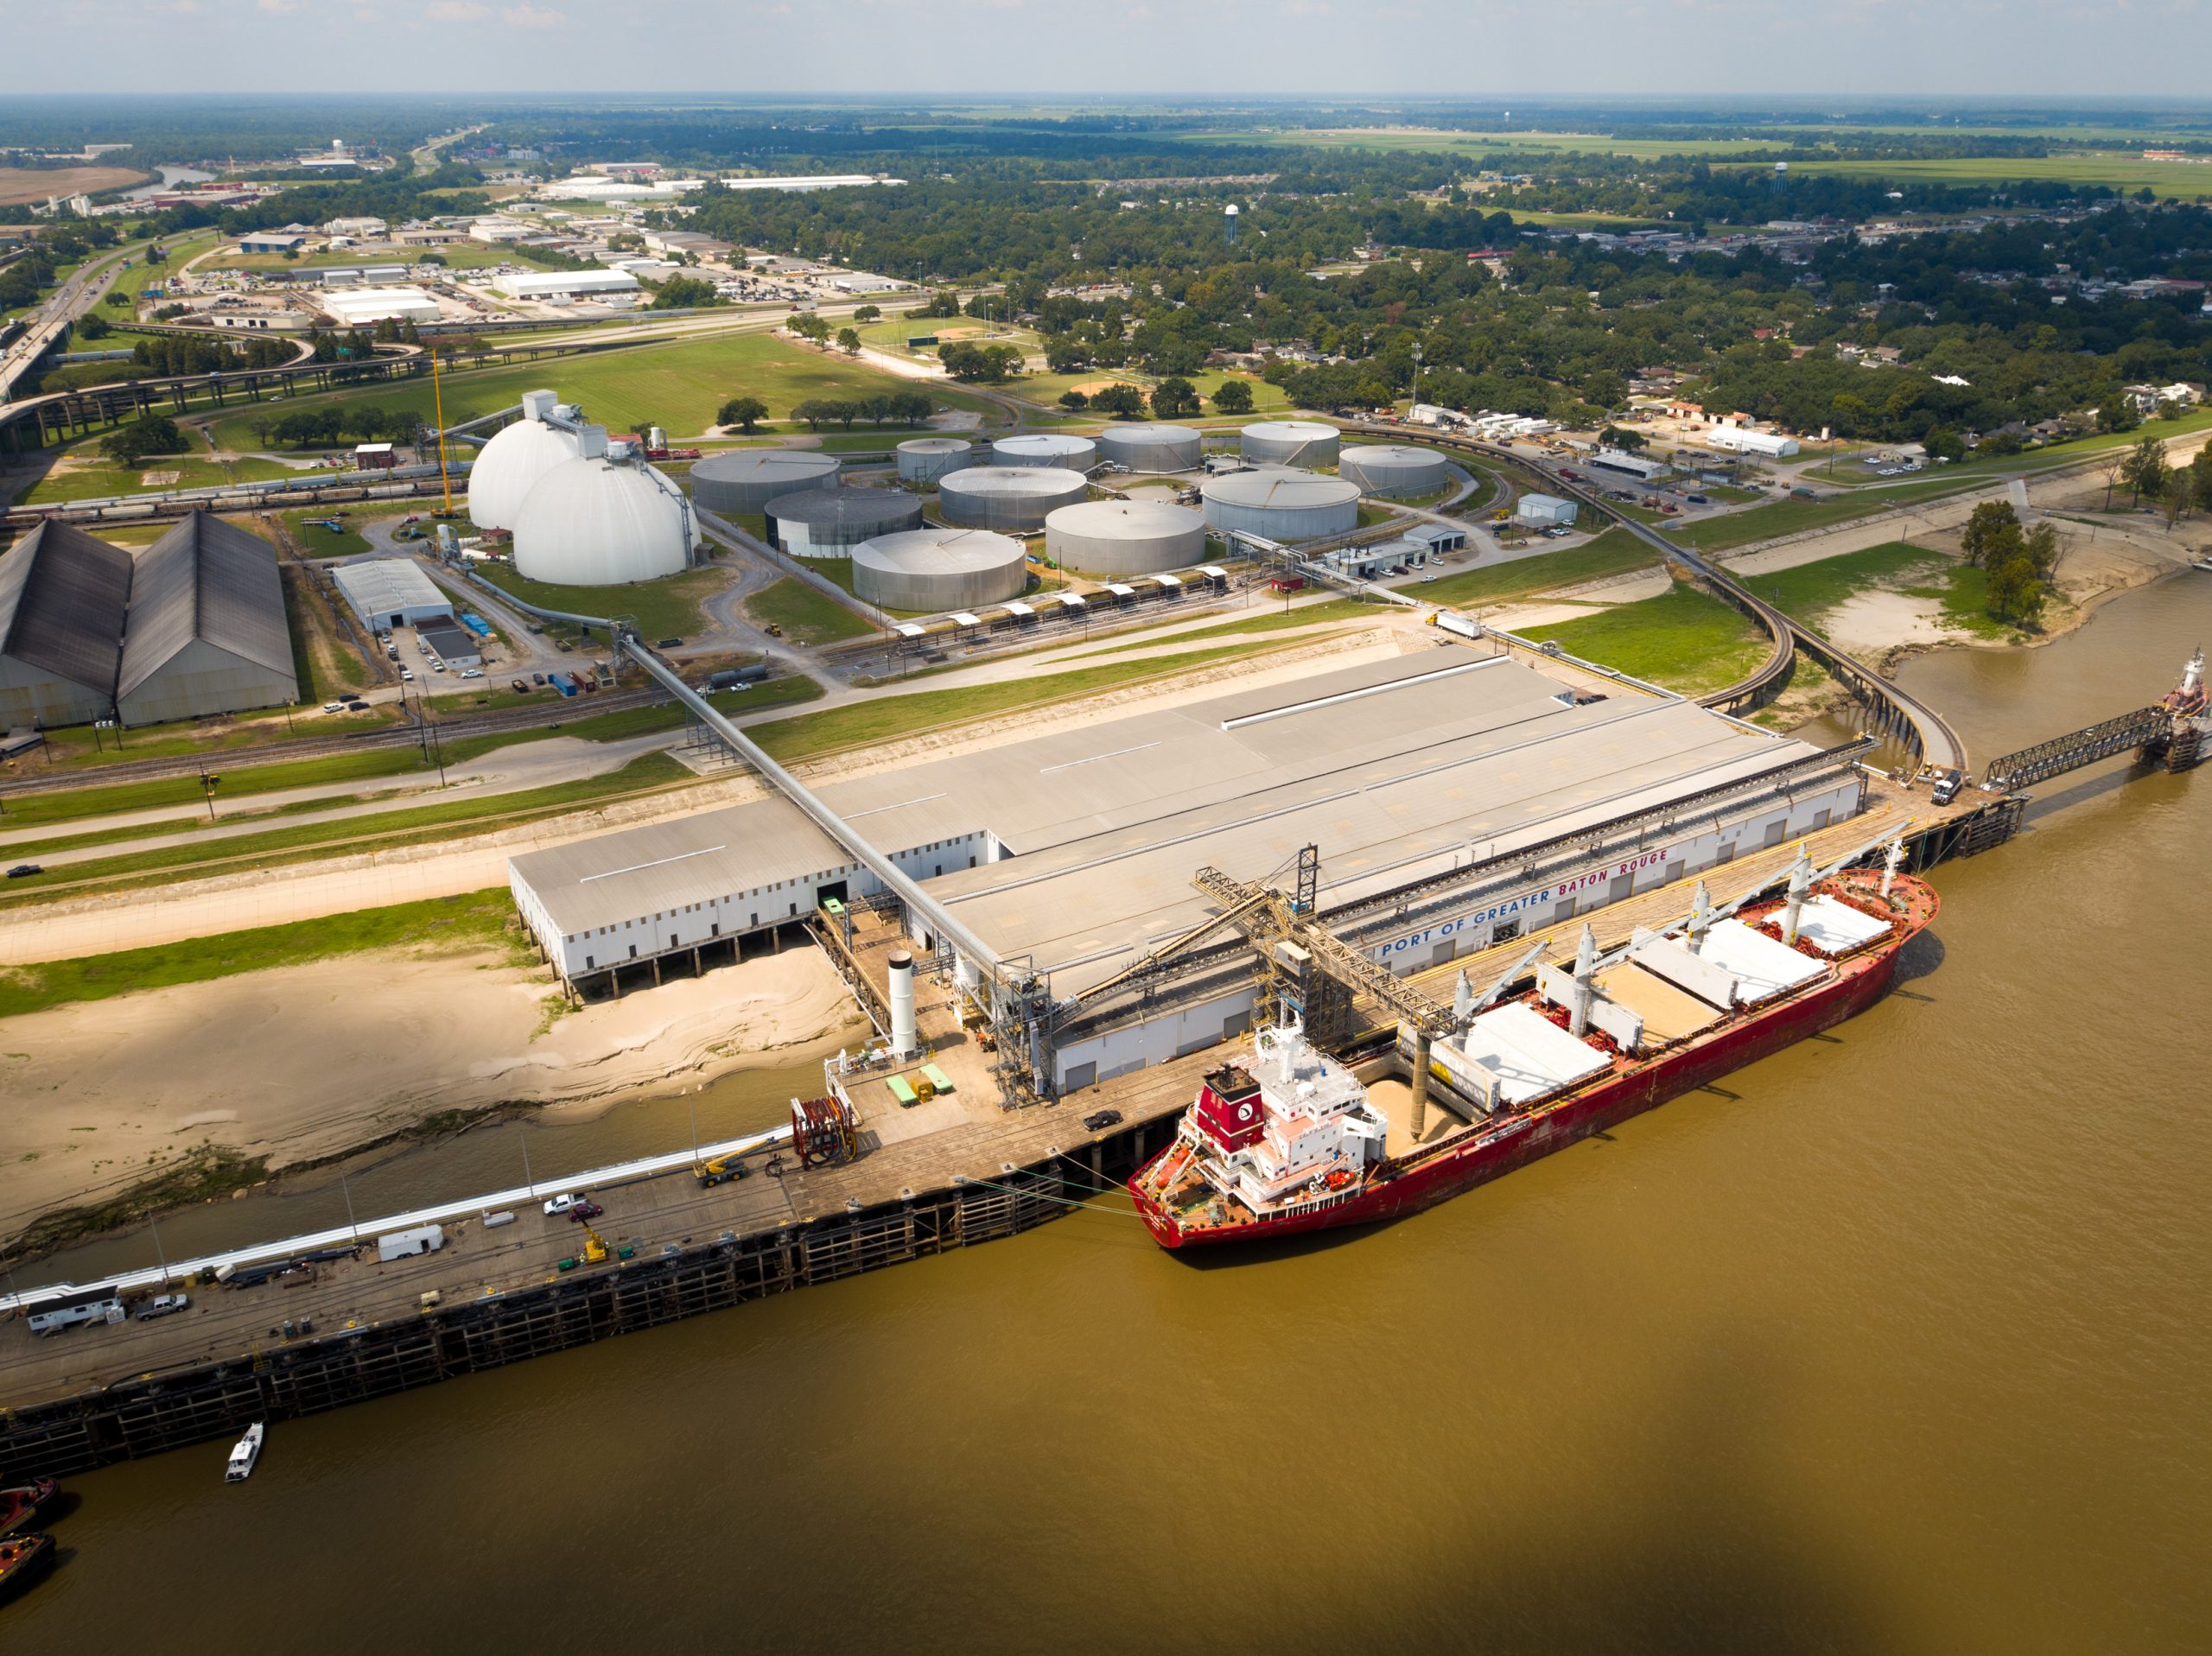 Sustainable biomass wood pellets being safely loaded at the Port of Greater Baton Rouge onto a vessel destined for Drax Power Station